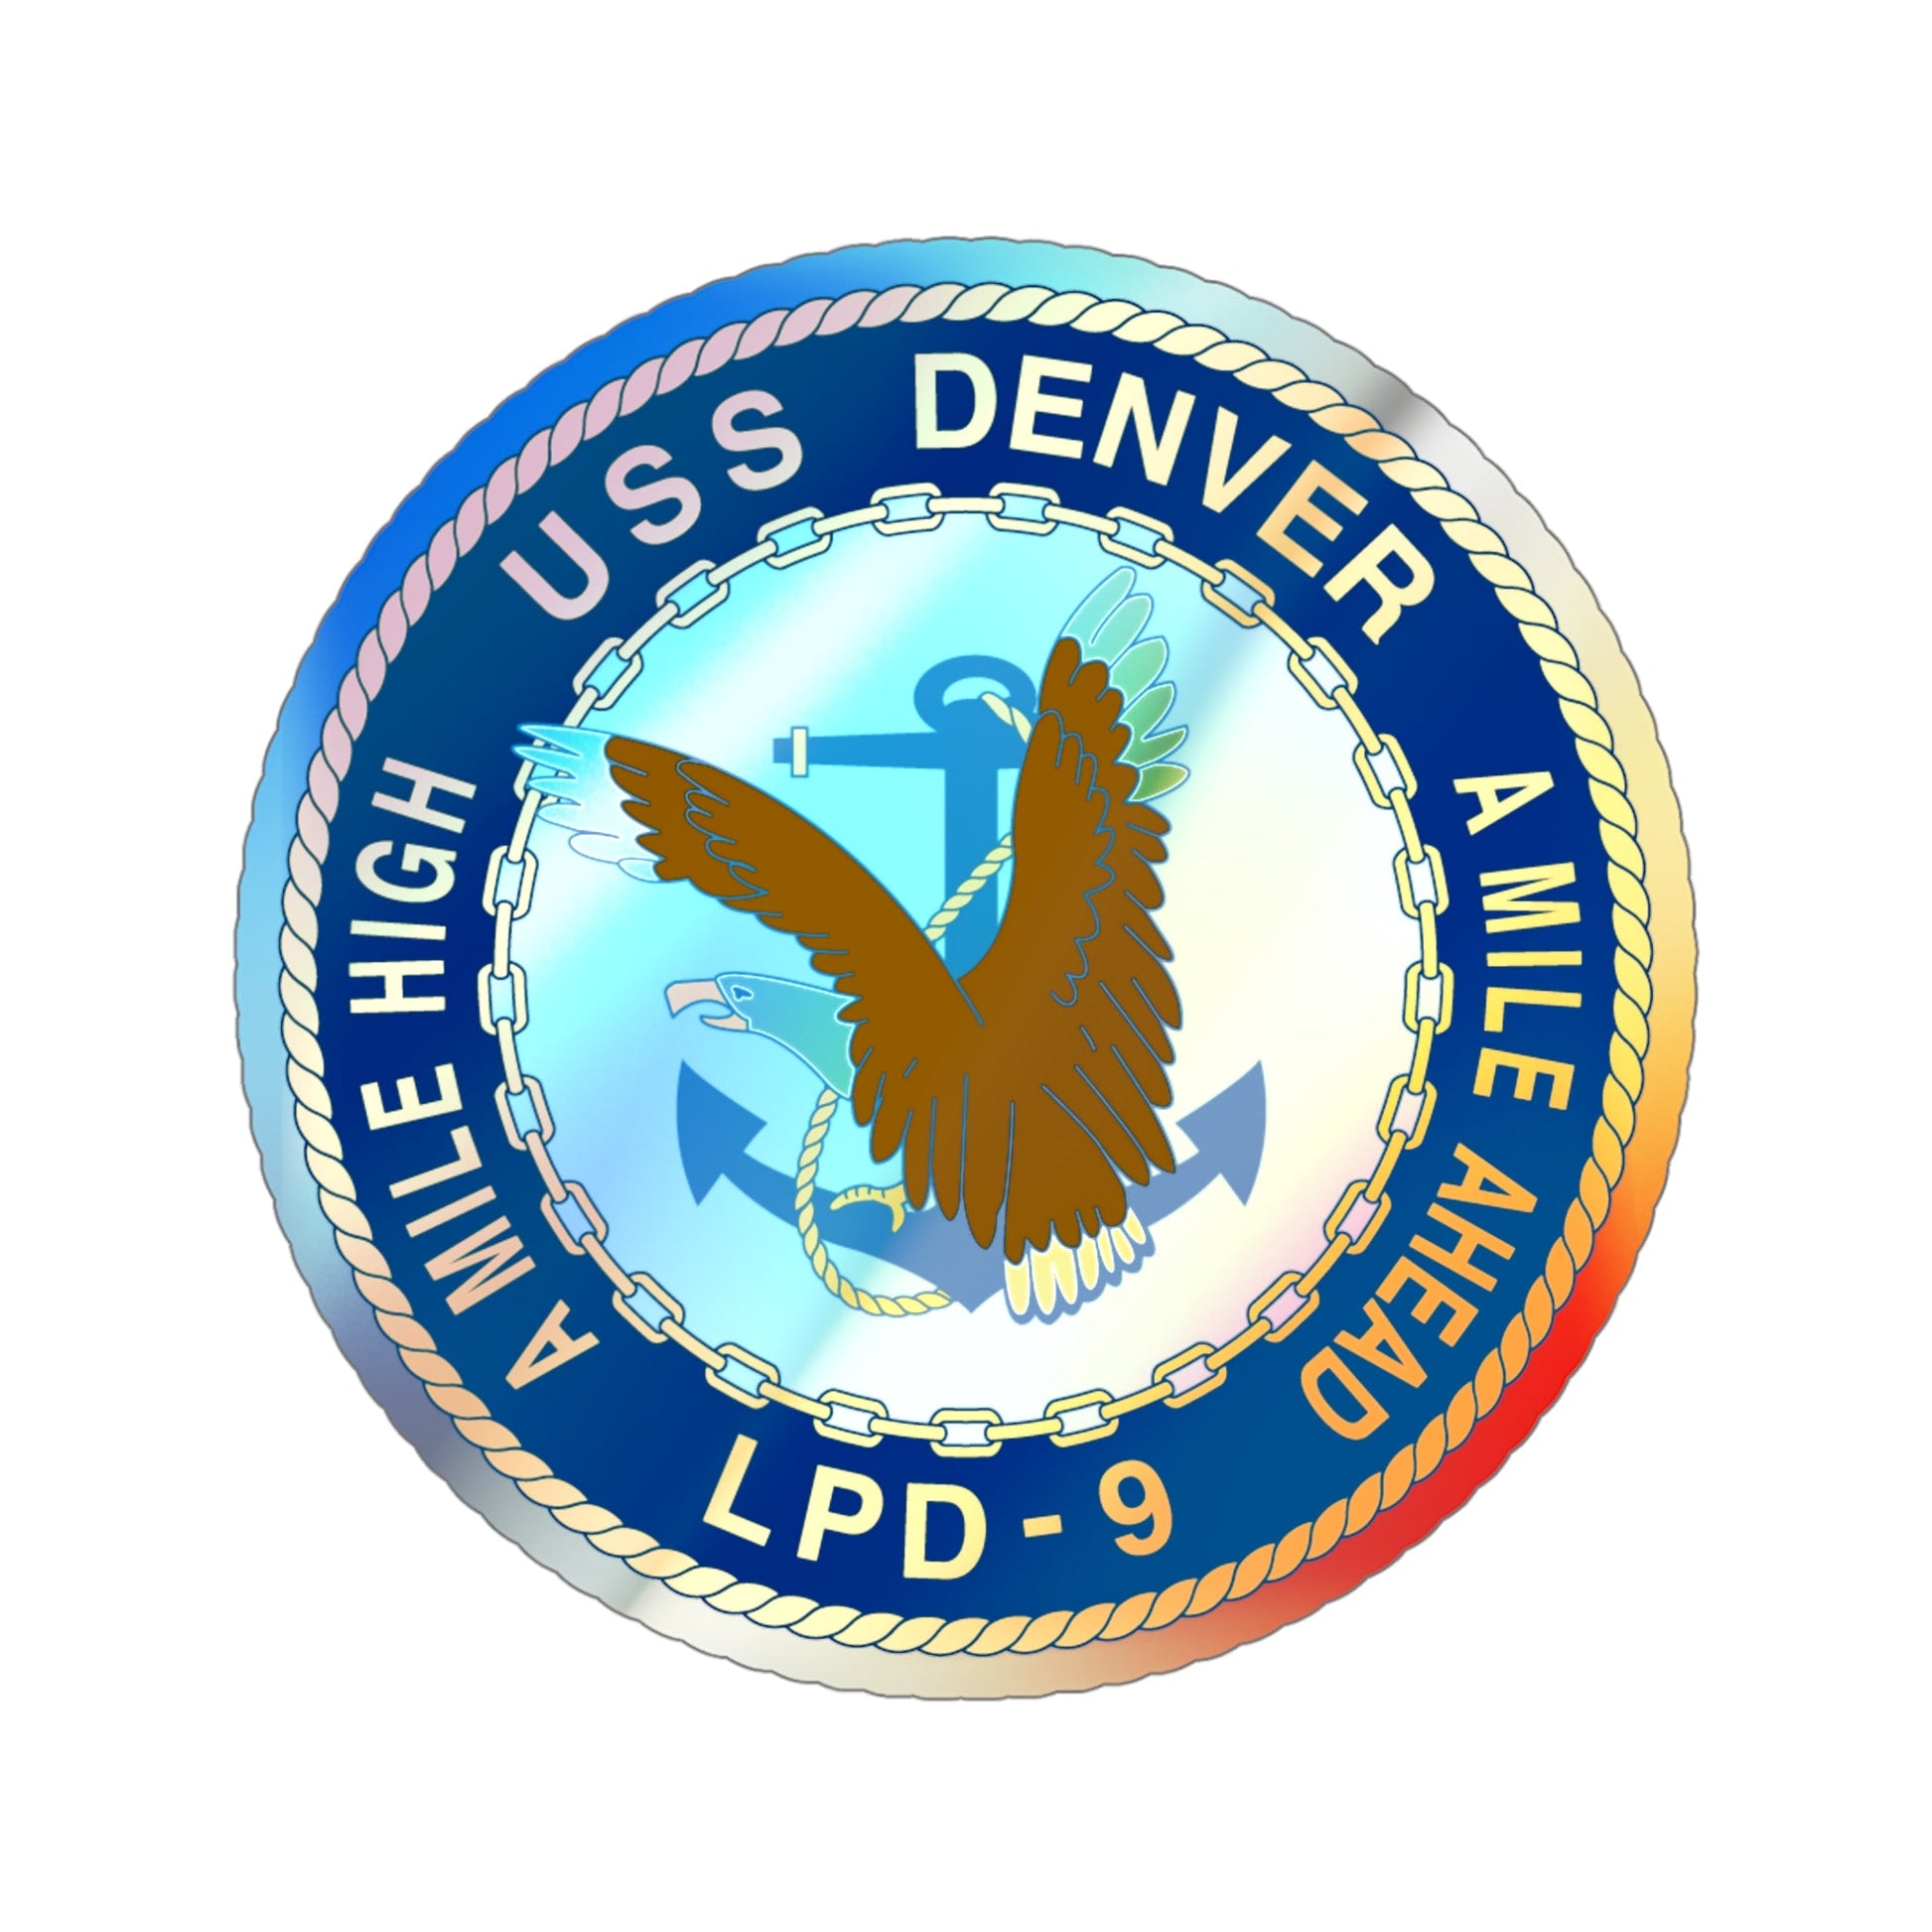 A Mile High USS Denver A Mile Ahead LPD 9 (U.S. Navy) Holographic STICKER Die-Cut Vinyl Decal-5 Inch-The Sticker Space